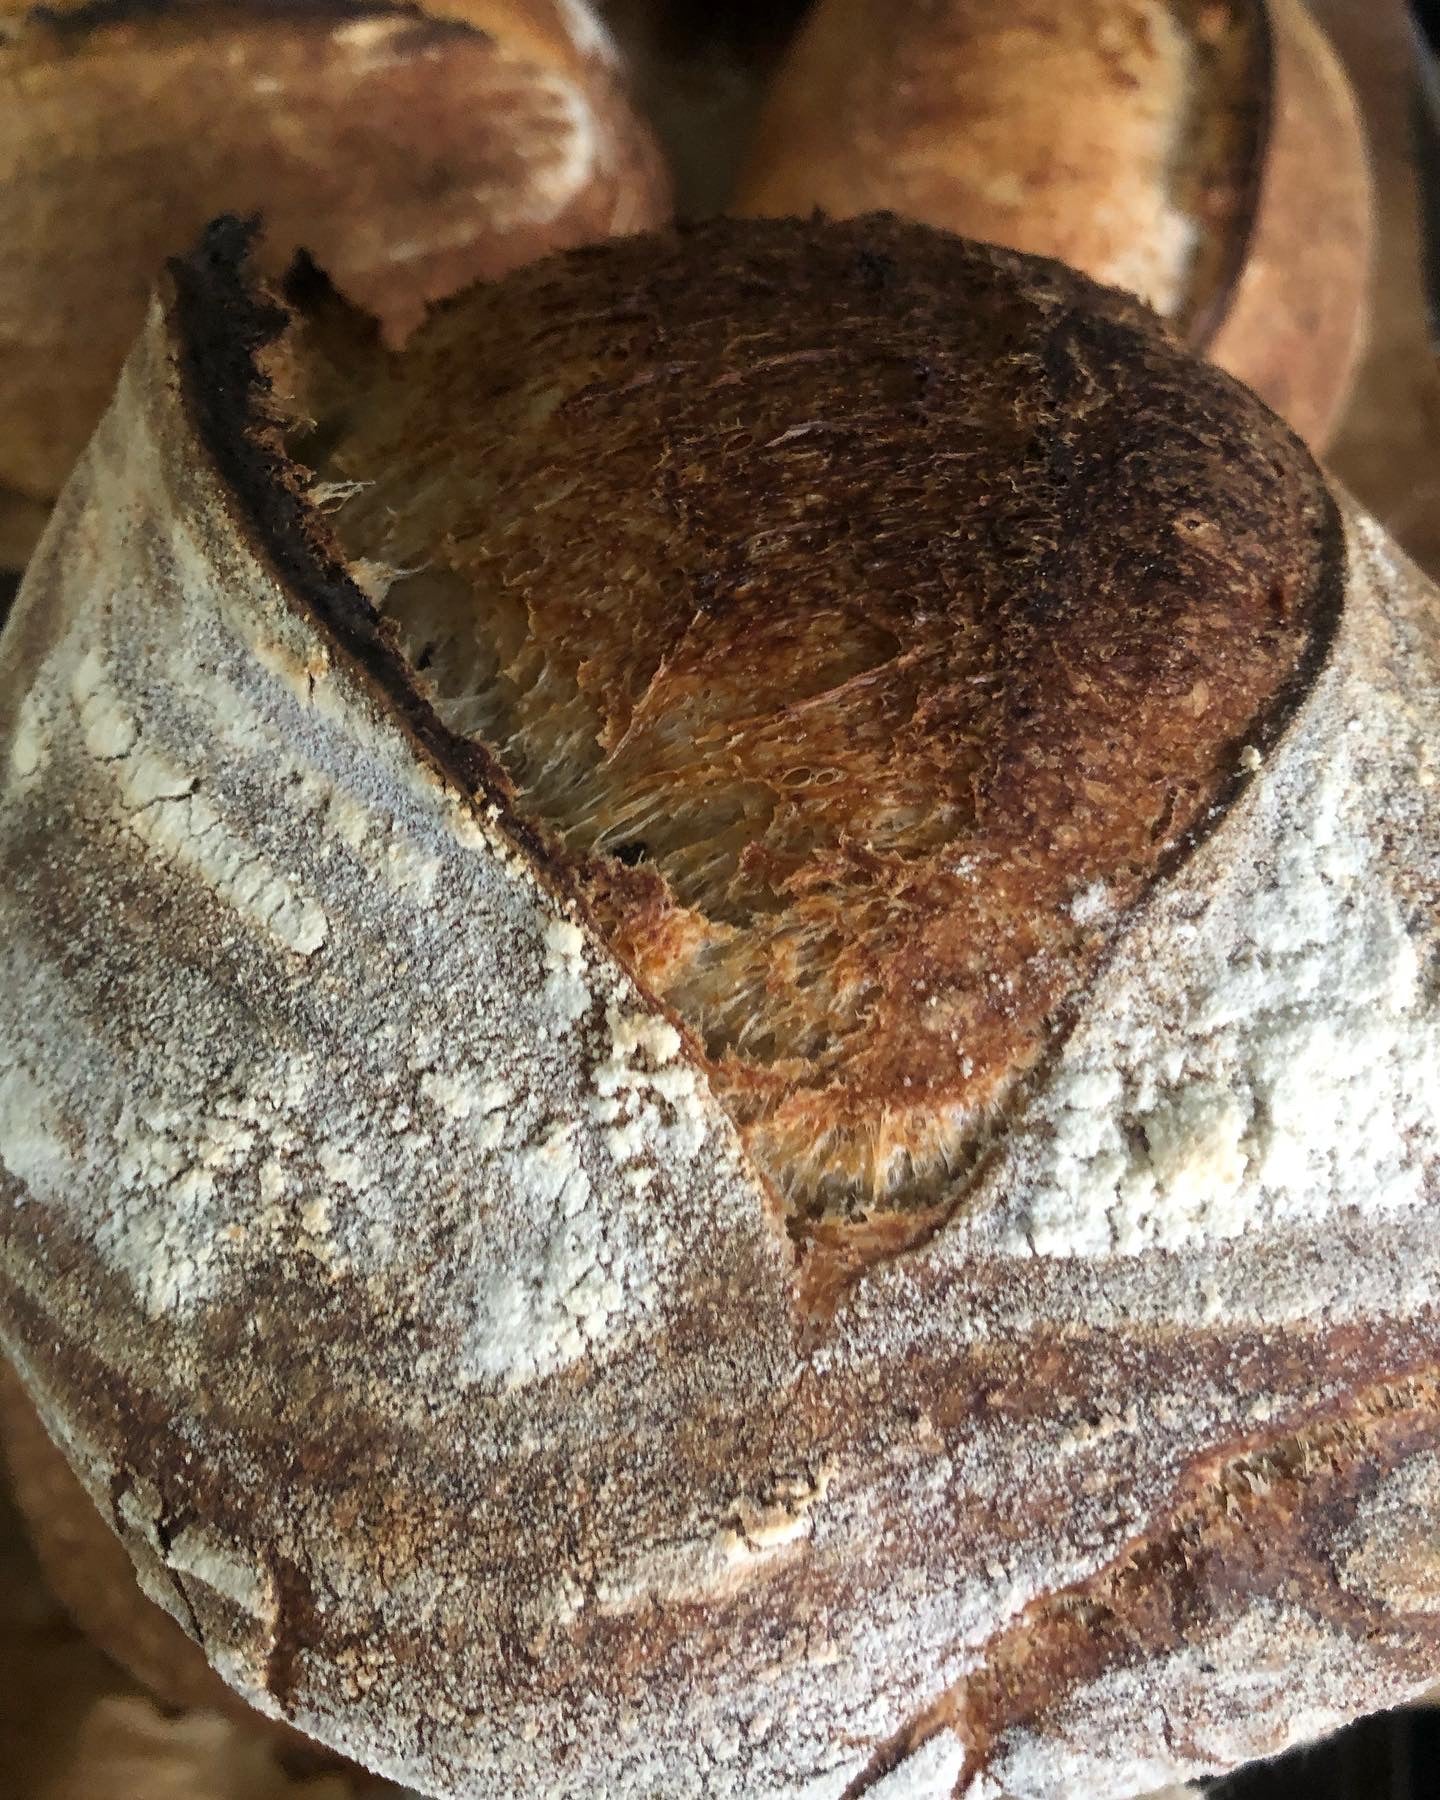 WED September 27 Crusty Country Sourdough Porch Pick up 4-9pm OR Lee Road 5-9pm